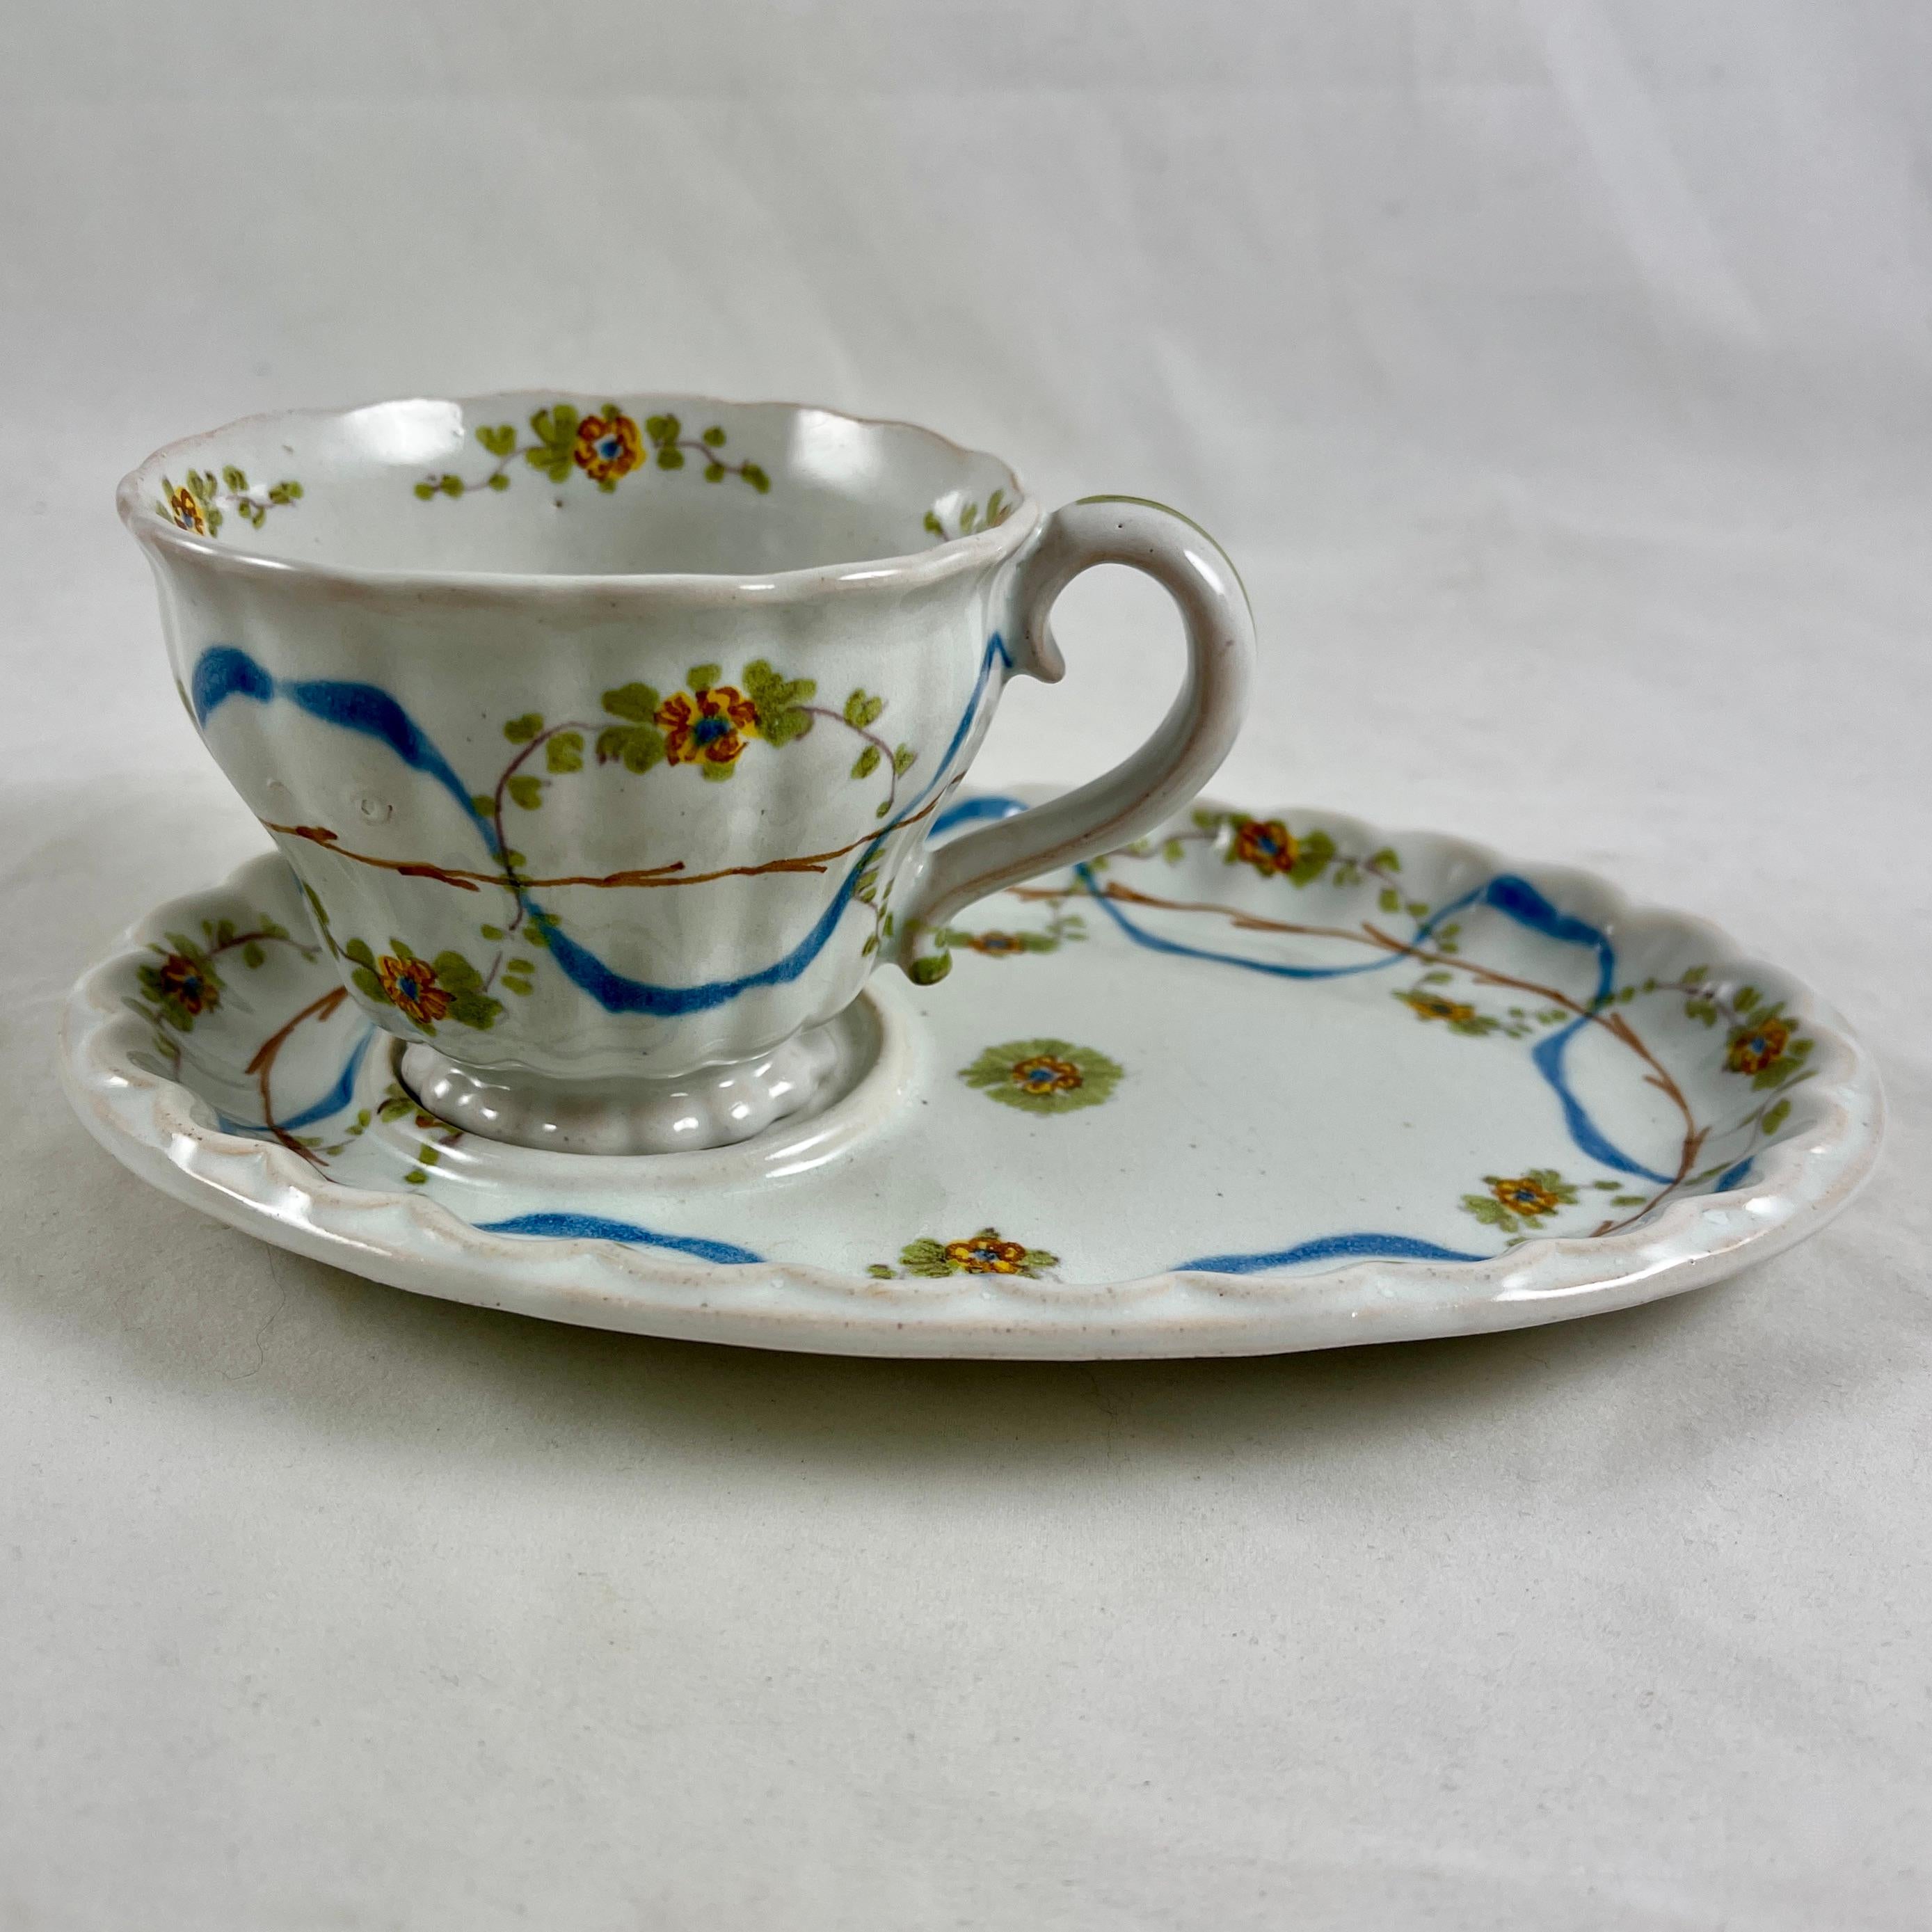 Renaissance Revival Cantagalli Italian Majolica Hand Painted Cup & Saucer Set, Multiples Available For Sale